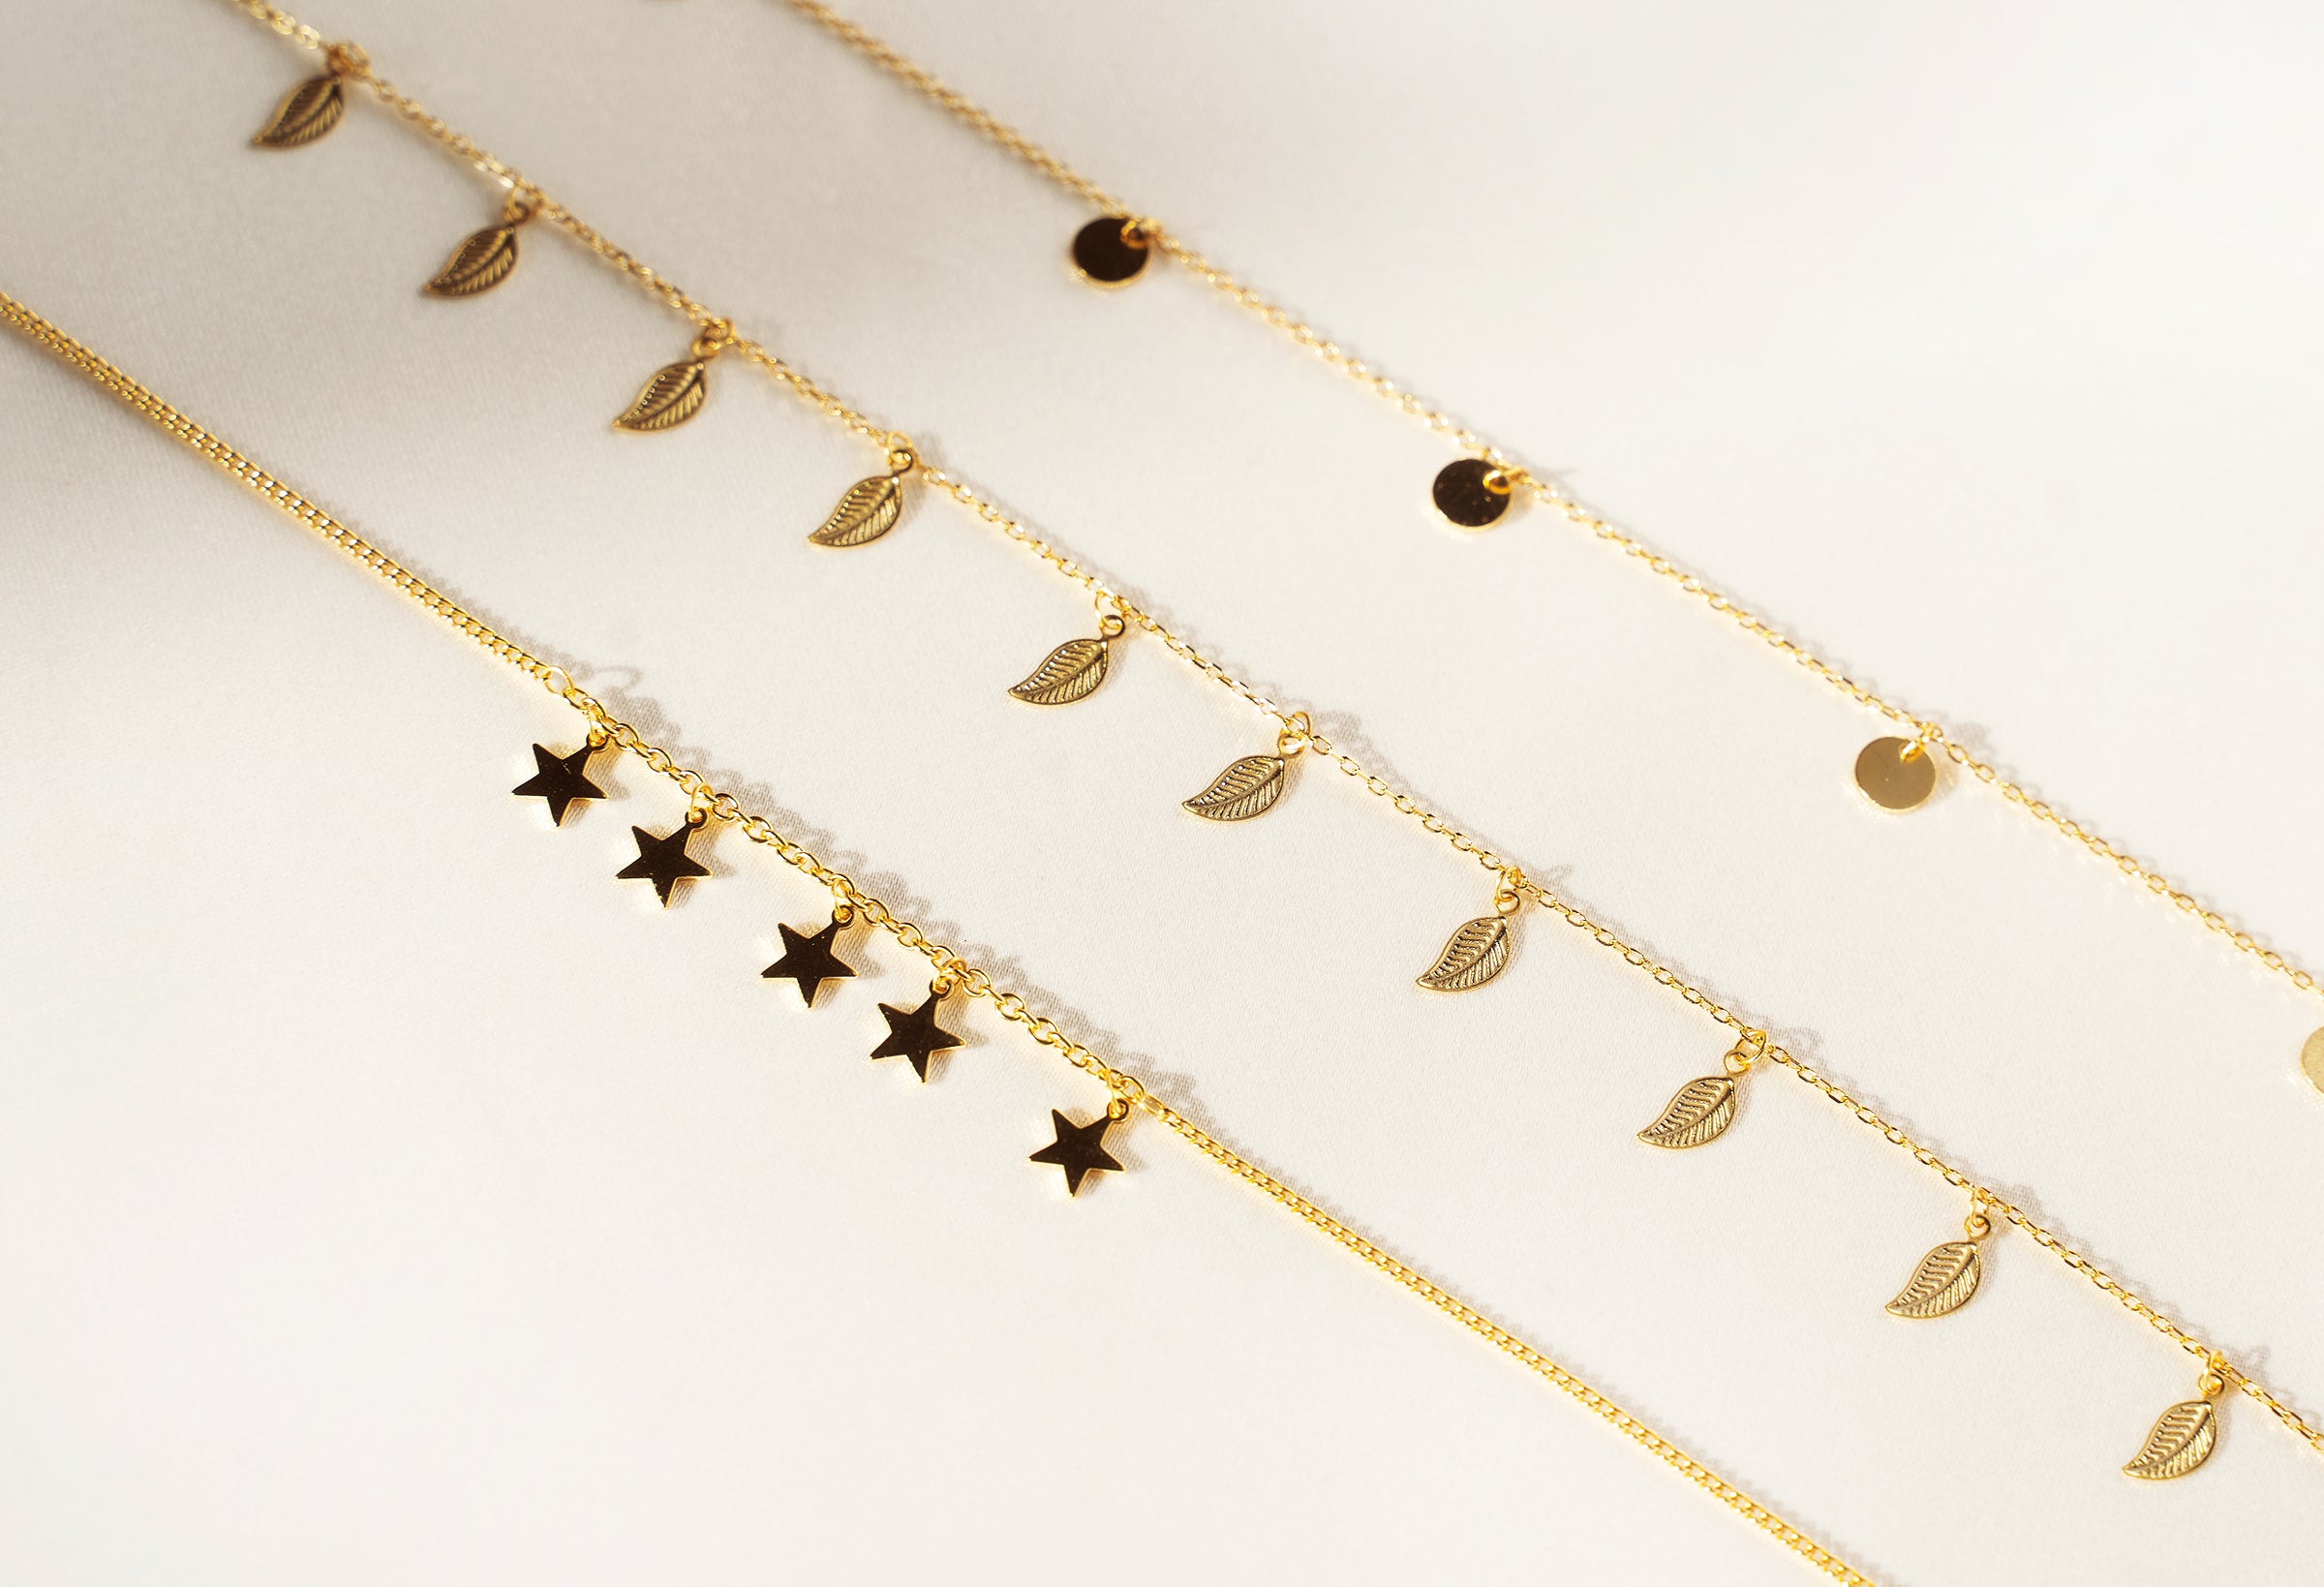 Starry Silver Anklet with Adjustable Length - 925 Sterling Silver, 14K Gold Plated, Dainty Design - Jewelry & Watches - Bijou Her -  -  - 